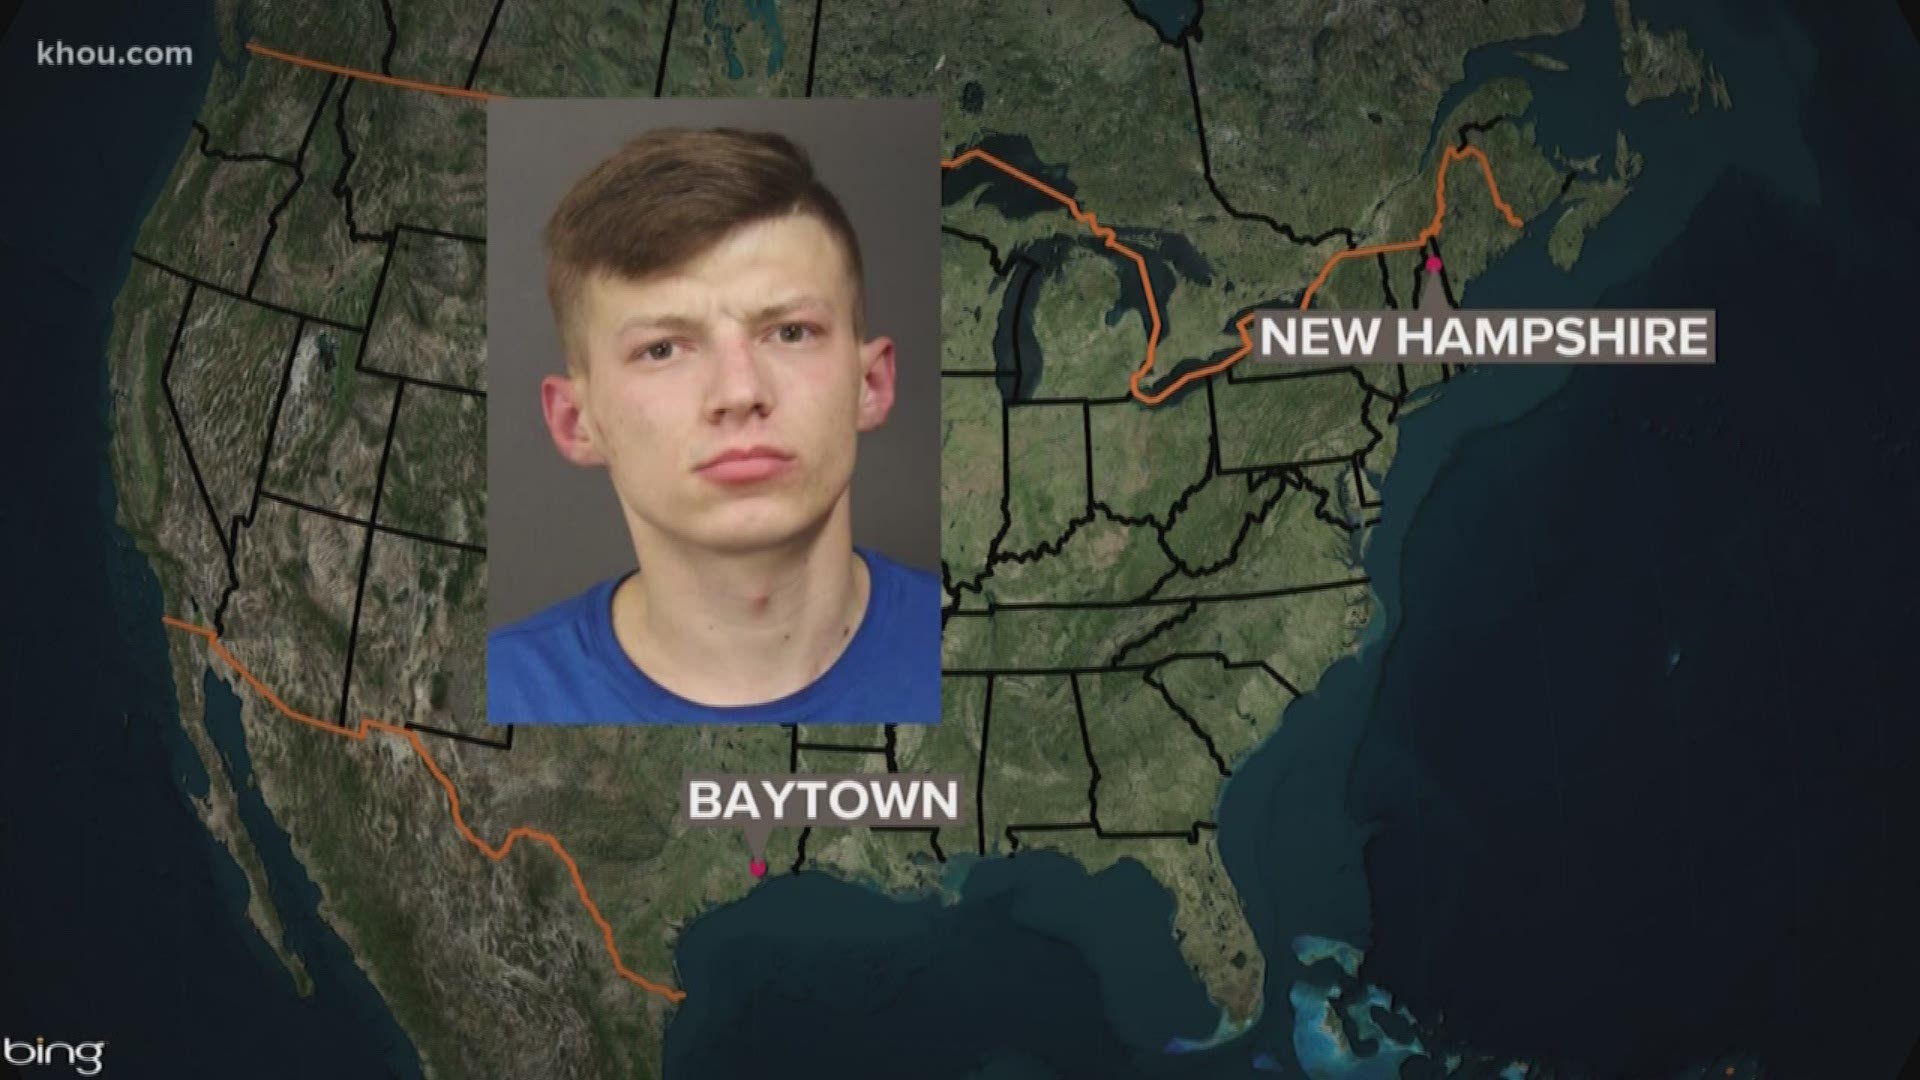 The pickup driver accused of causing the deadly New Hampshire crash that killed seven was also involved in a rollover crash in Baytown just three weeks before, according to the Baytown Police Department.